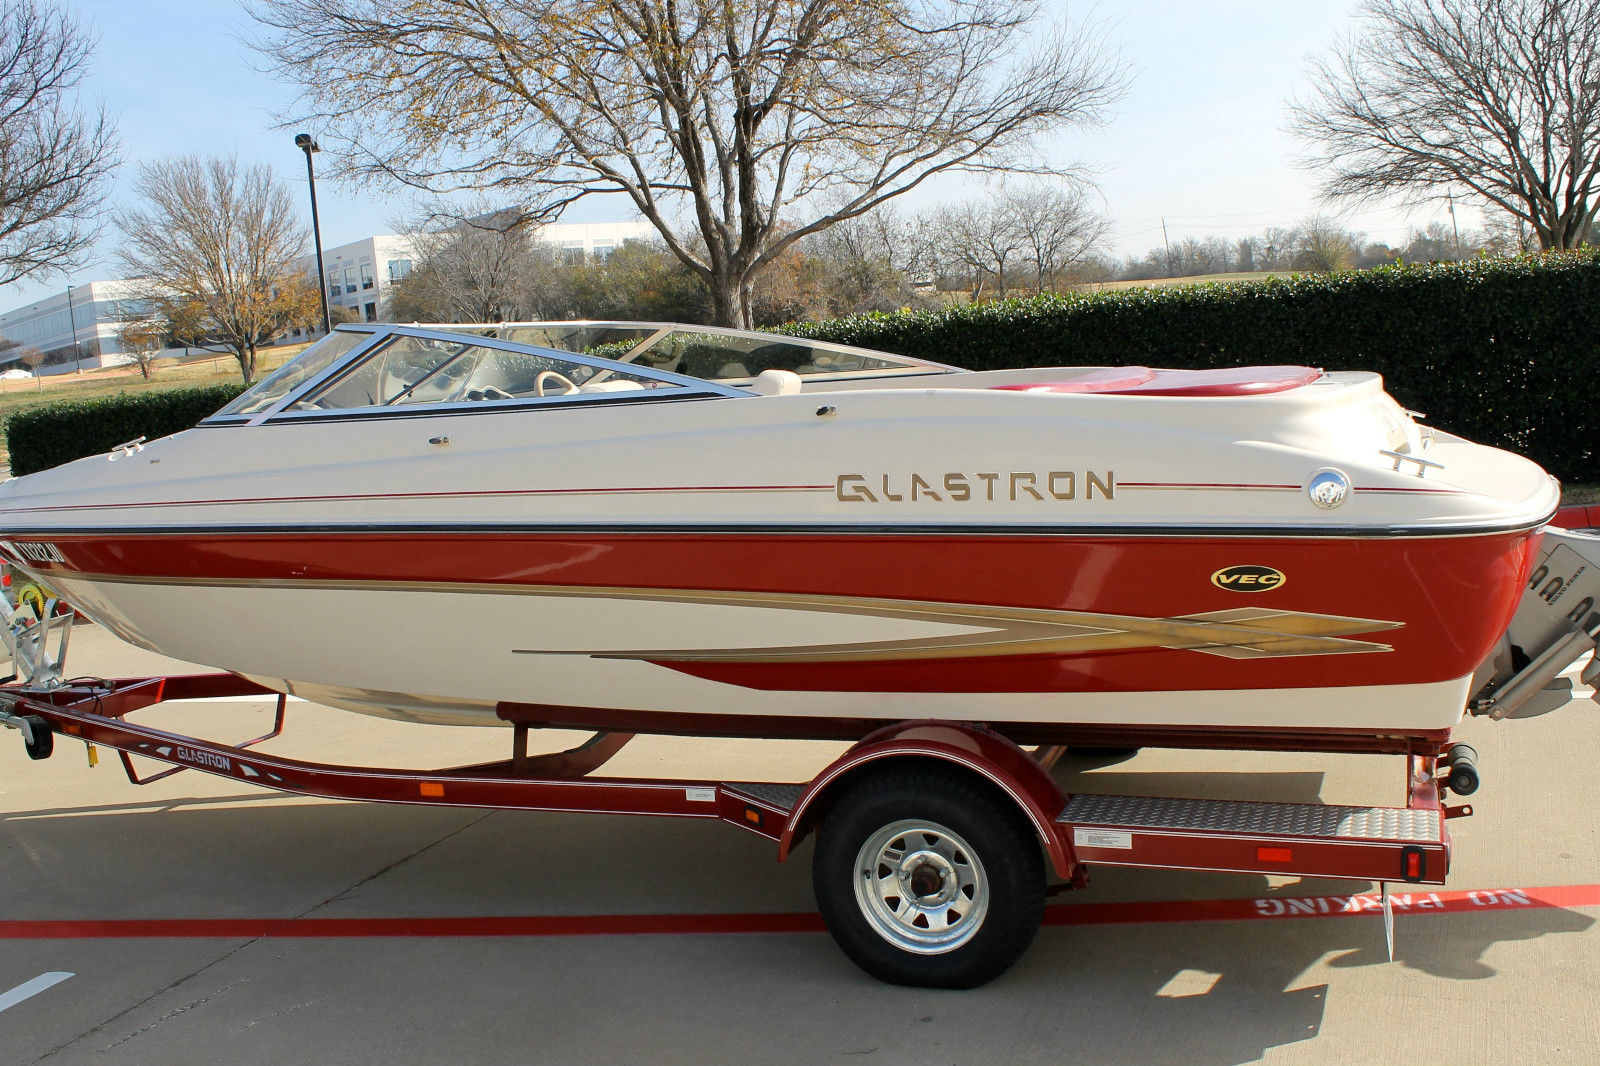 Glastron GX 205 Boat For Sale From USA.